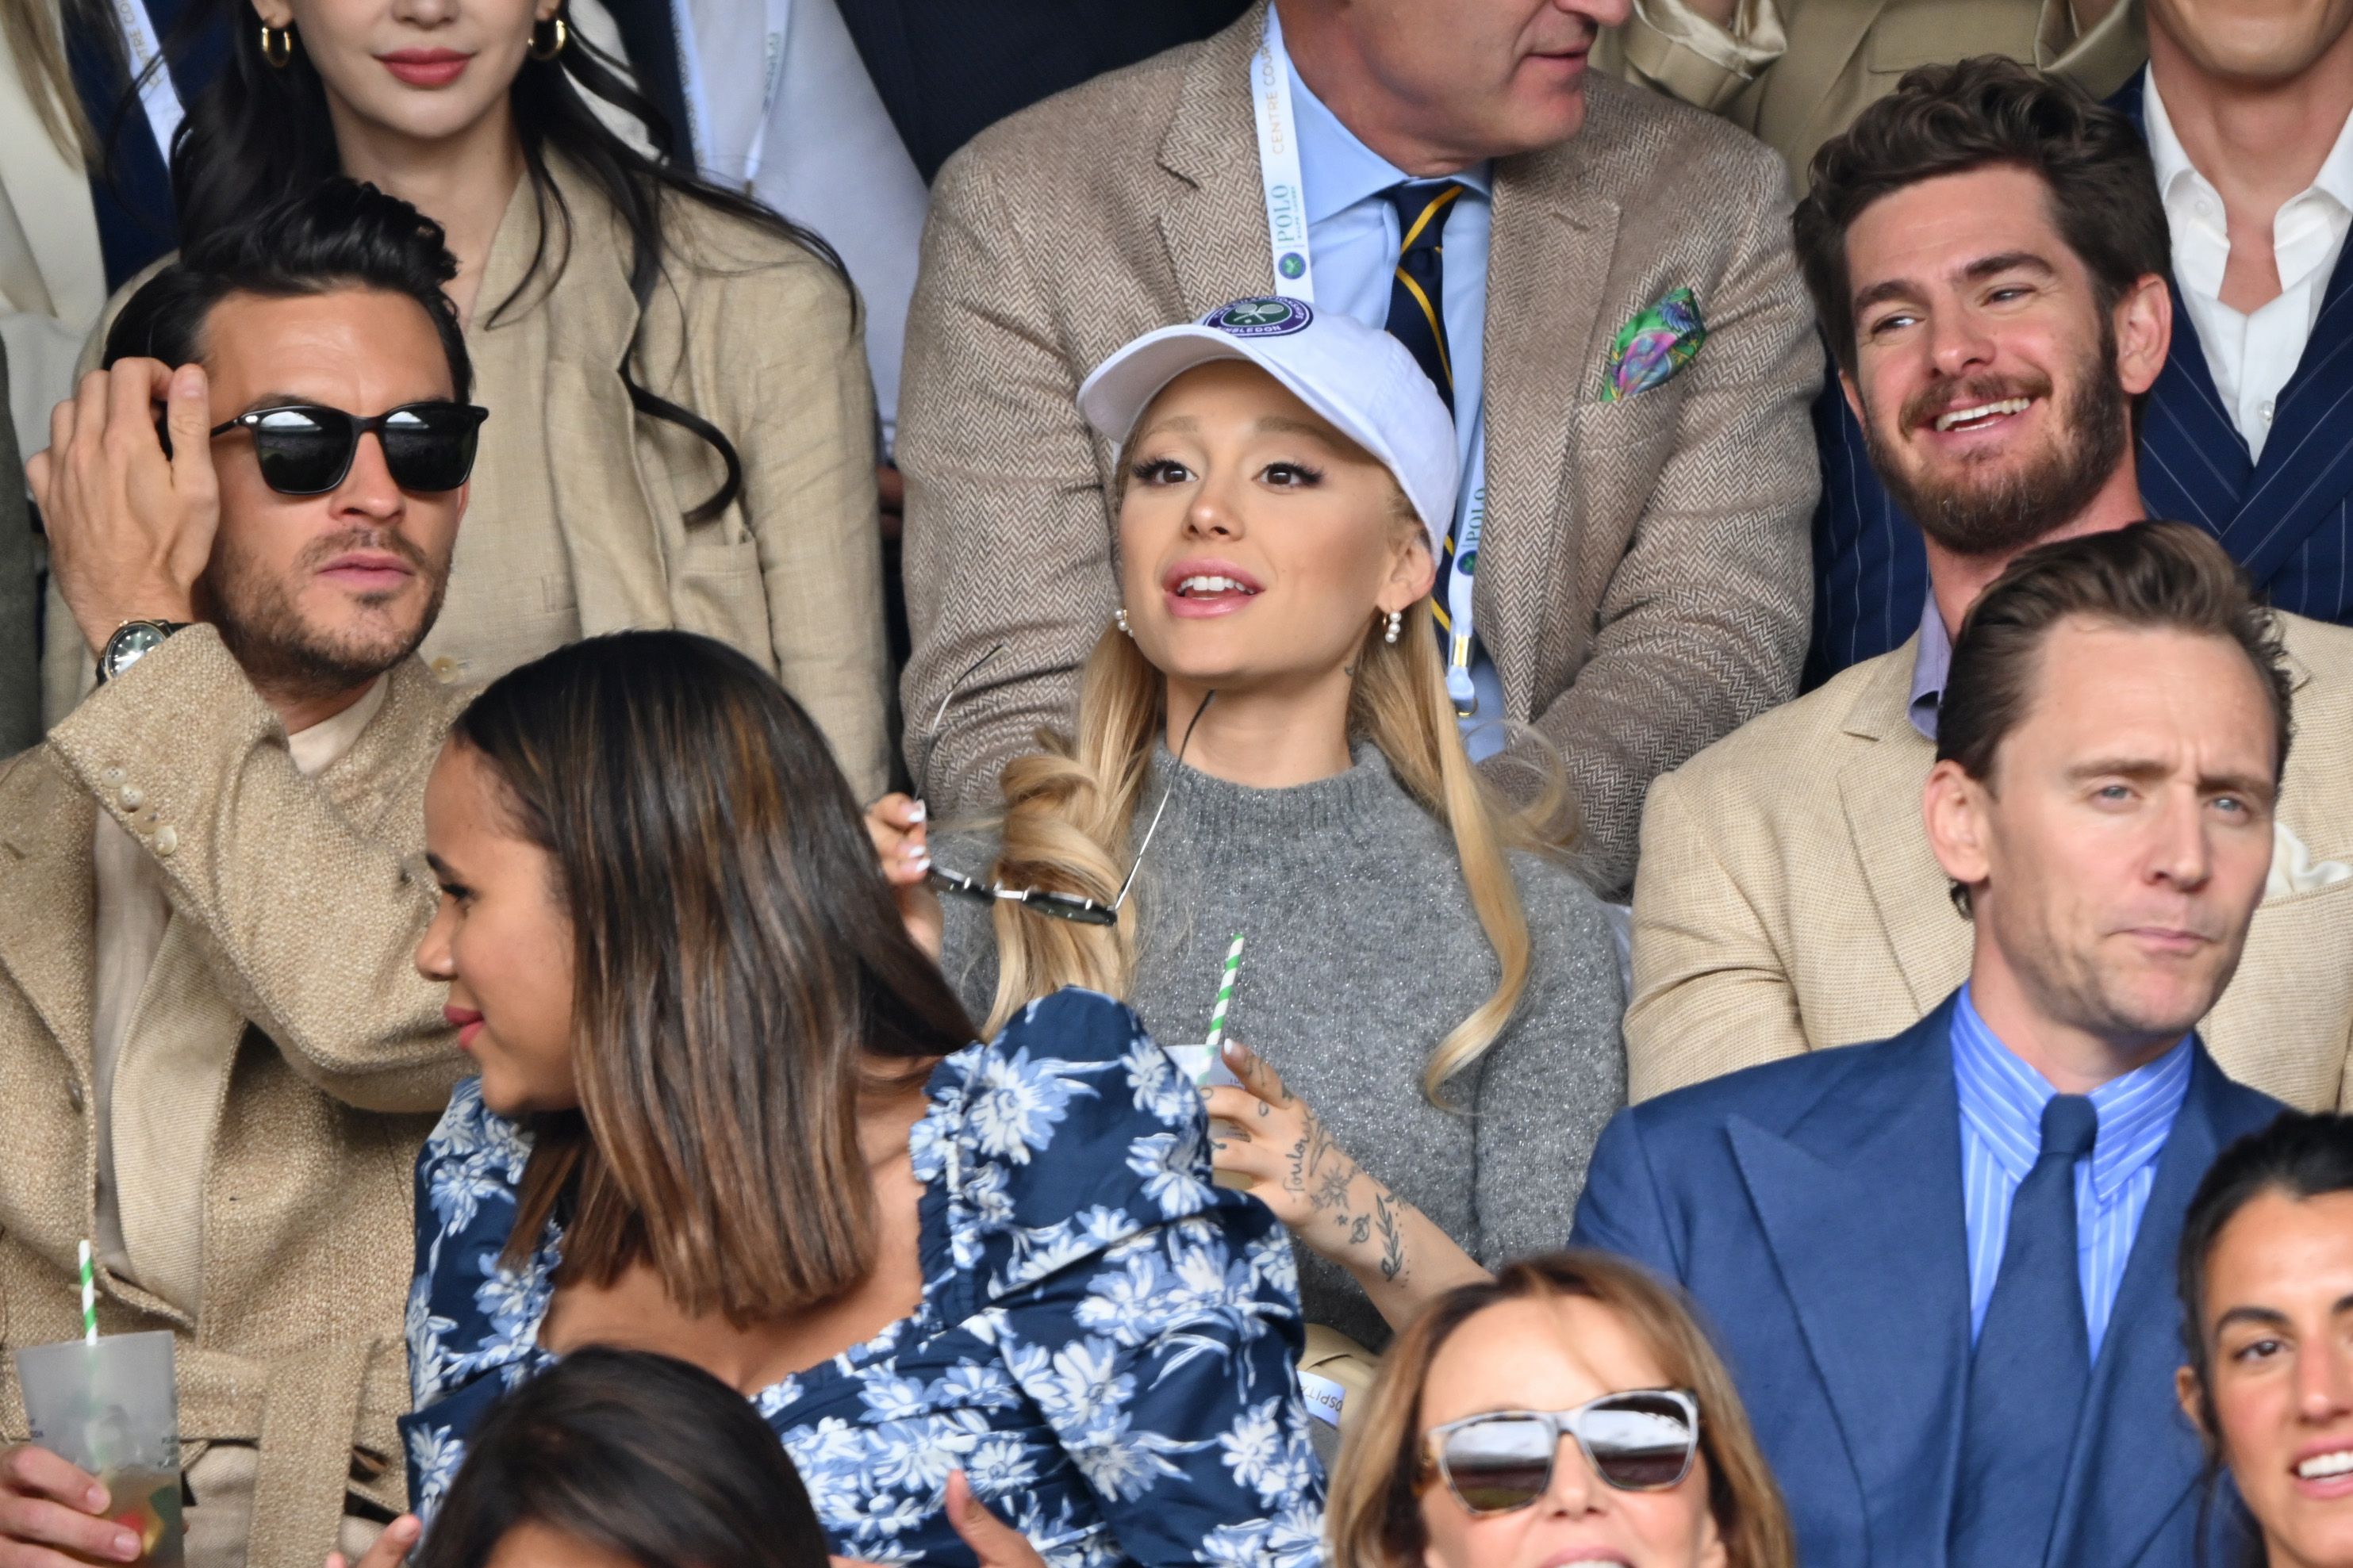 See Ariana Grande, Andrew Garfield, and More Attend Star-Studded Wimbledon Finals